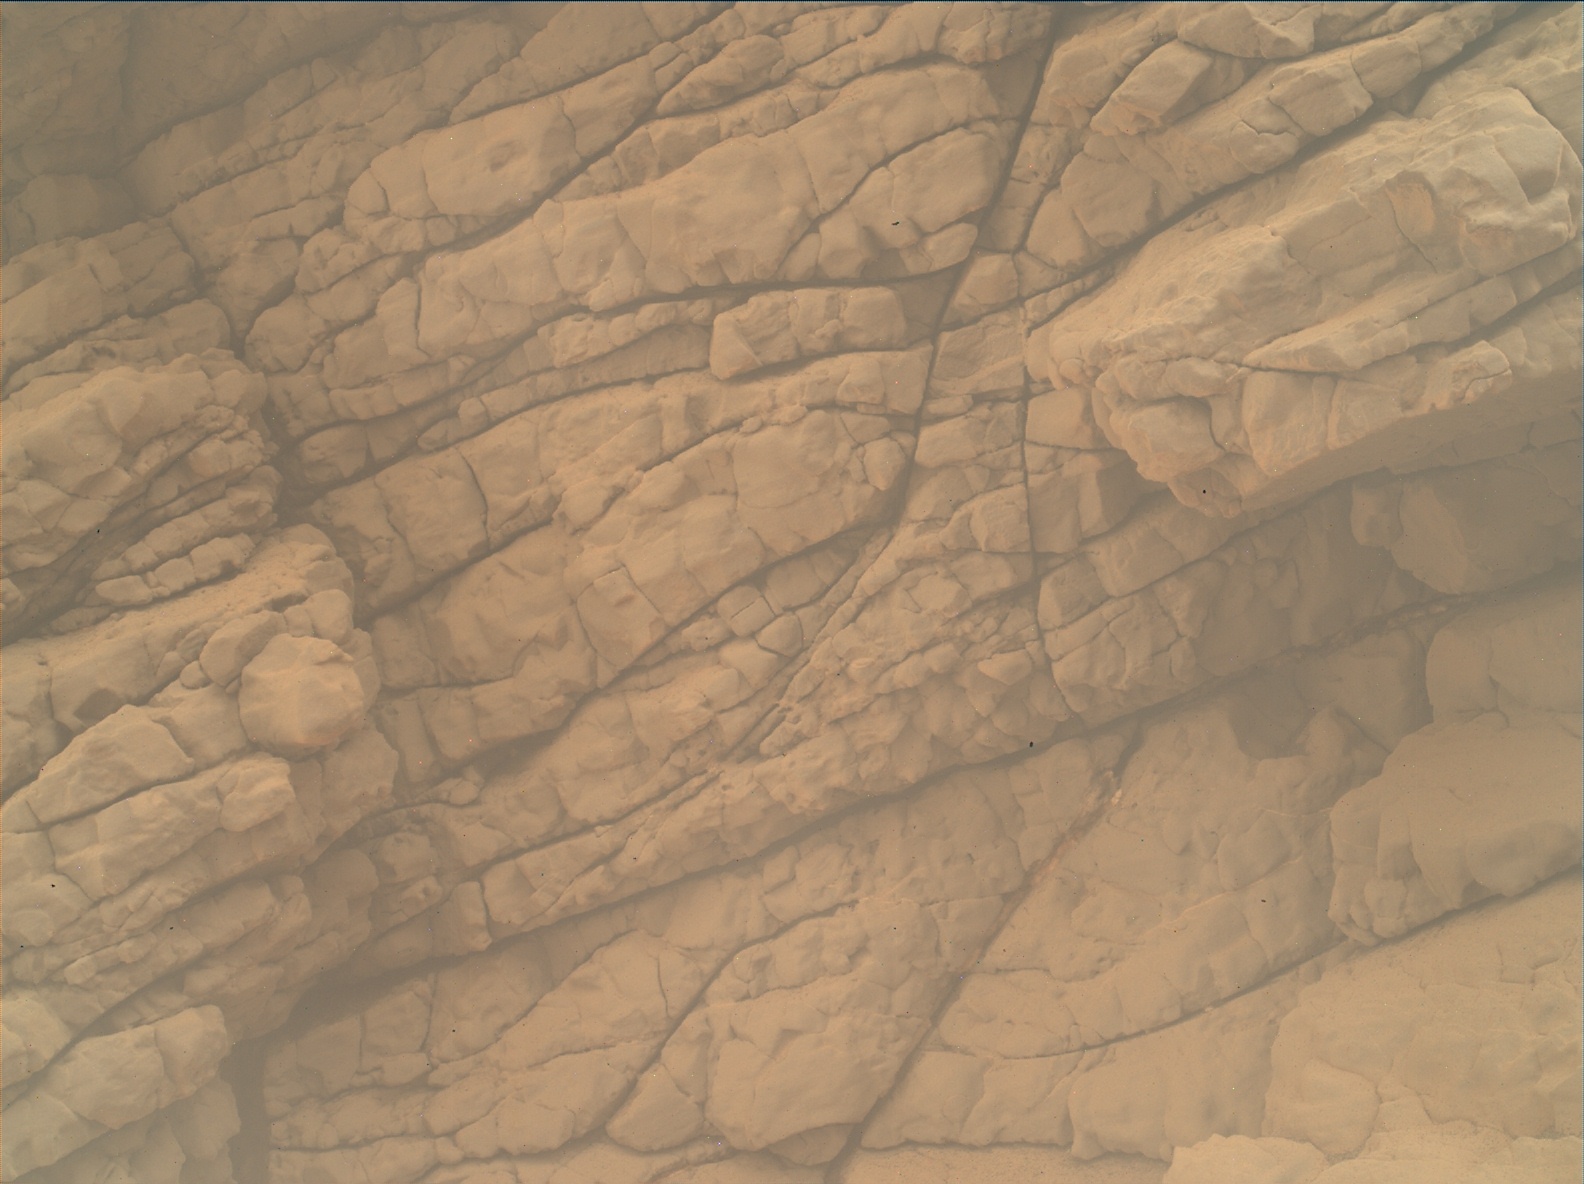 Nasa's Mars rover Curiosity acquired this image using its Mars Hand Lens Imager (MAHLI) on Sol 3536